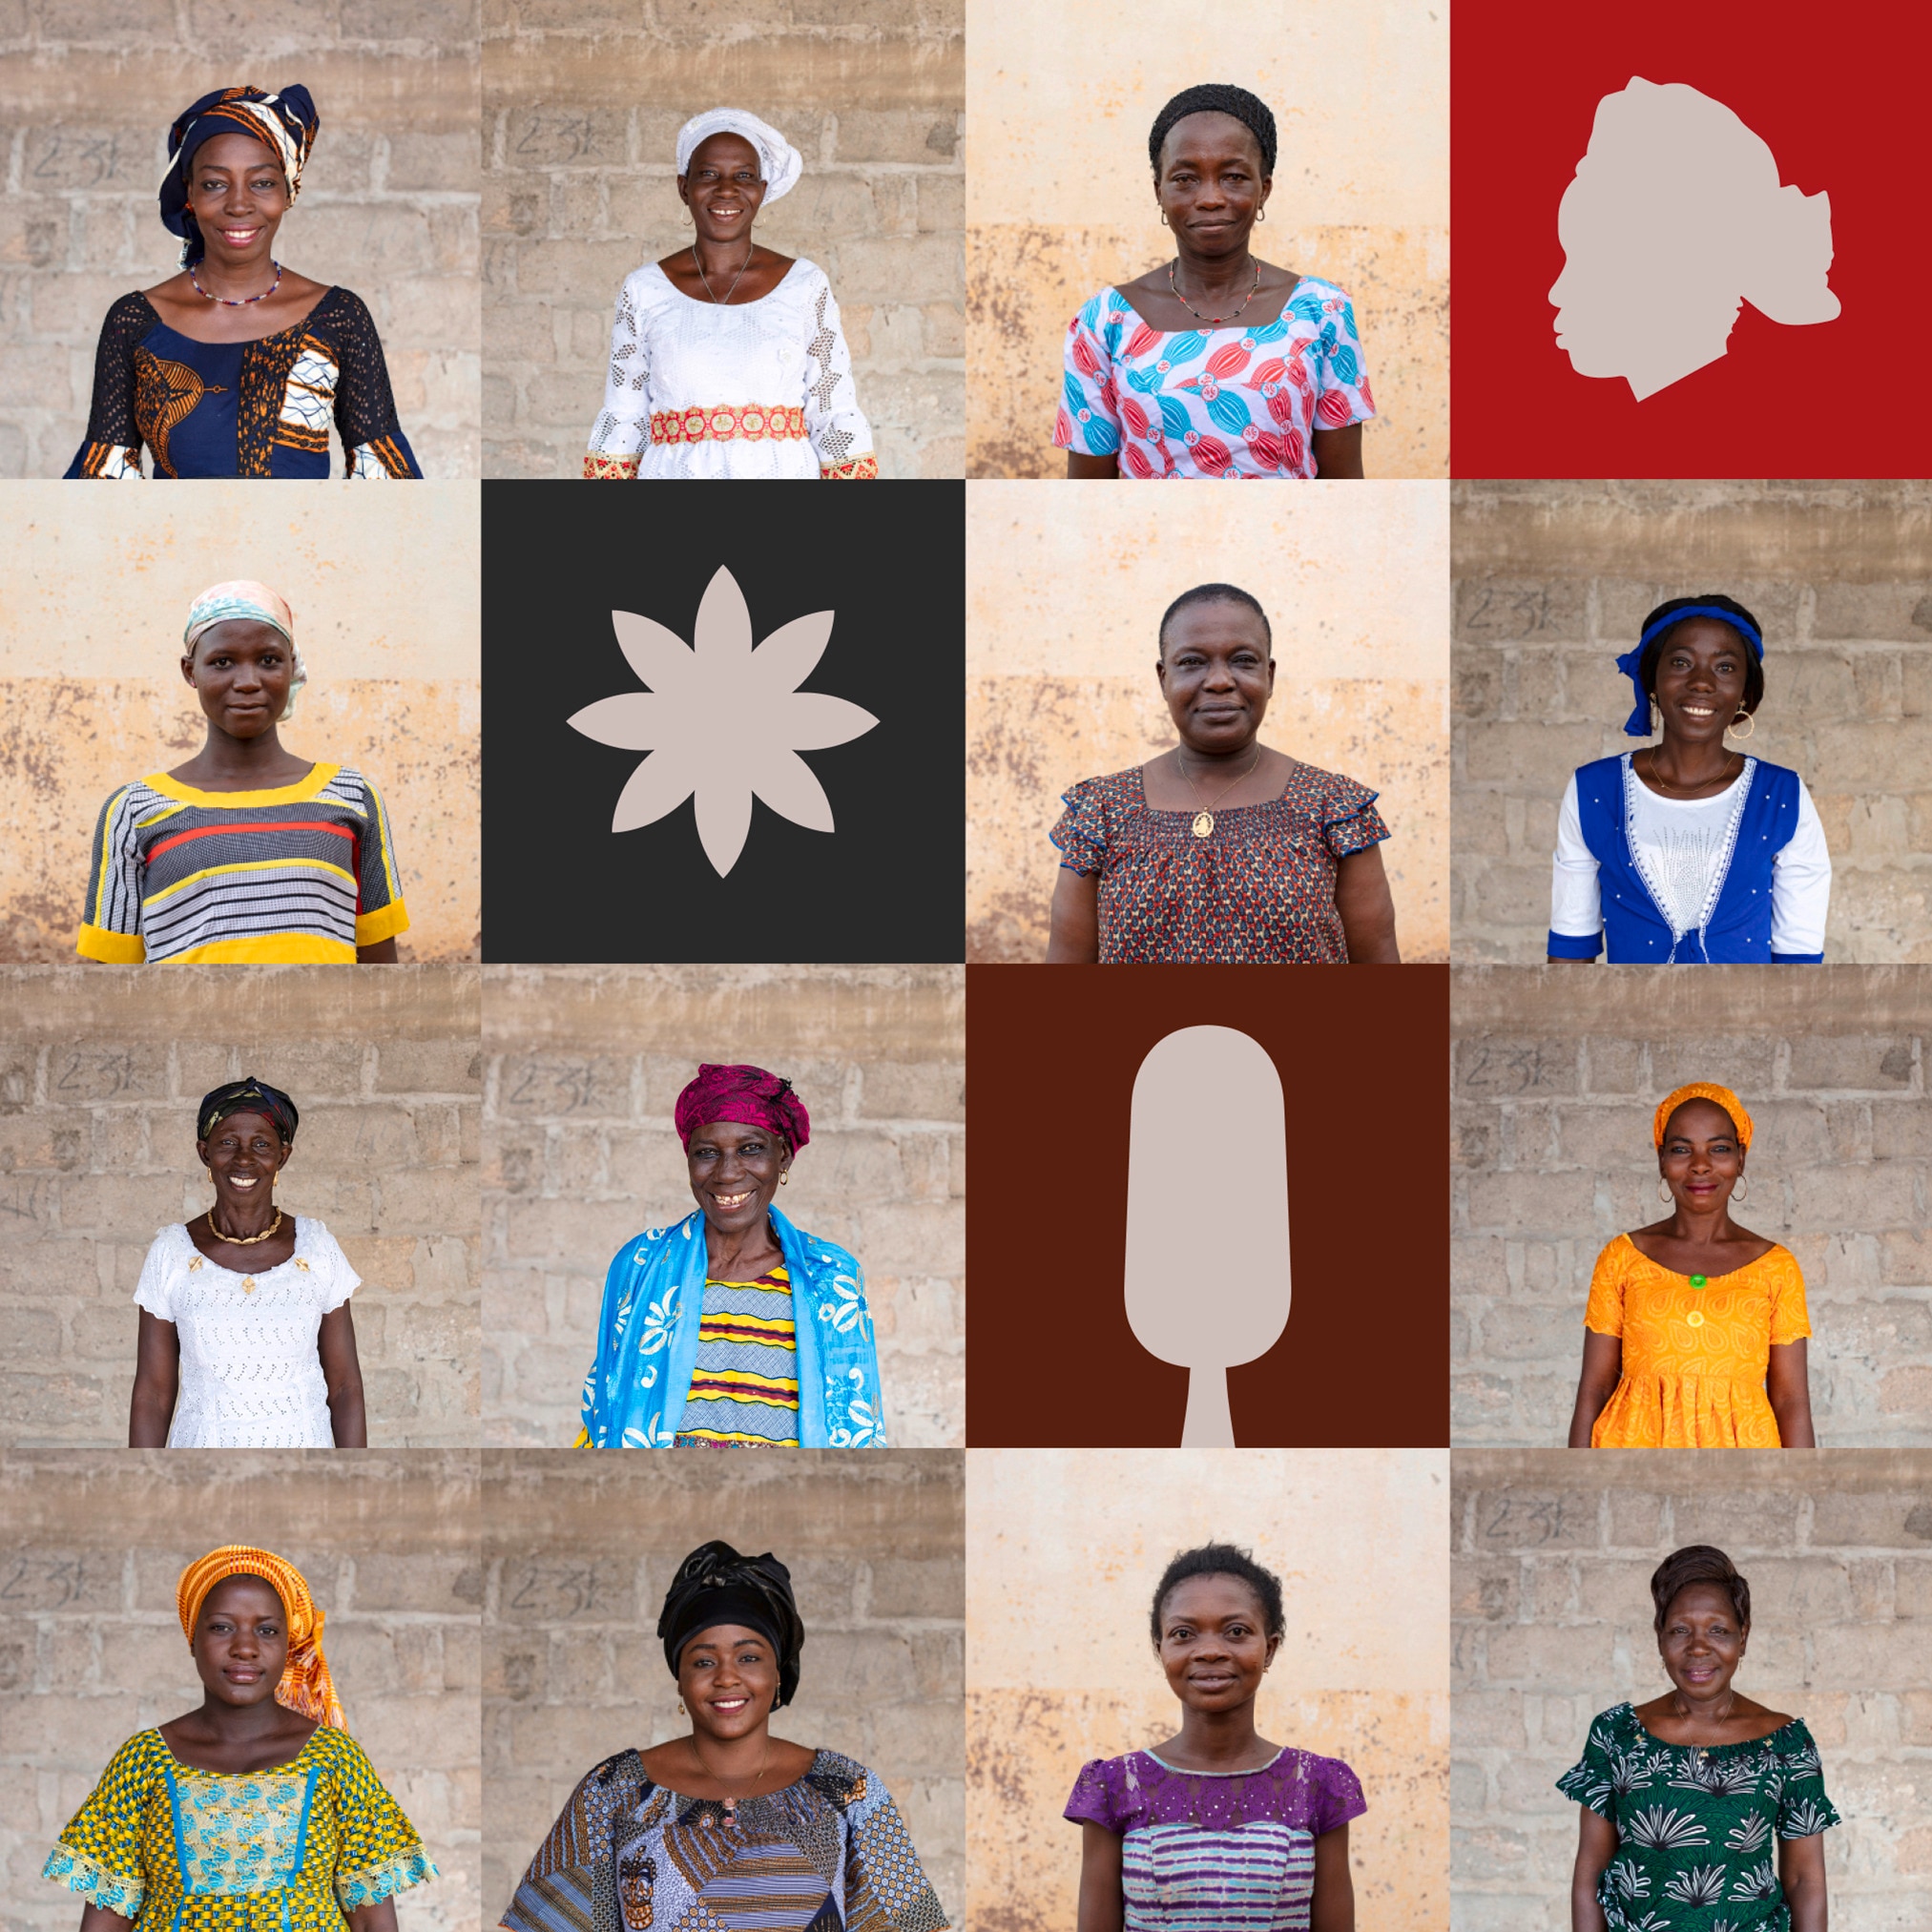 grid of 13 smiling african women portraits #3 - interspersed with a few colourful graphic square cut out illustrations